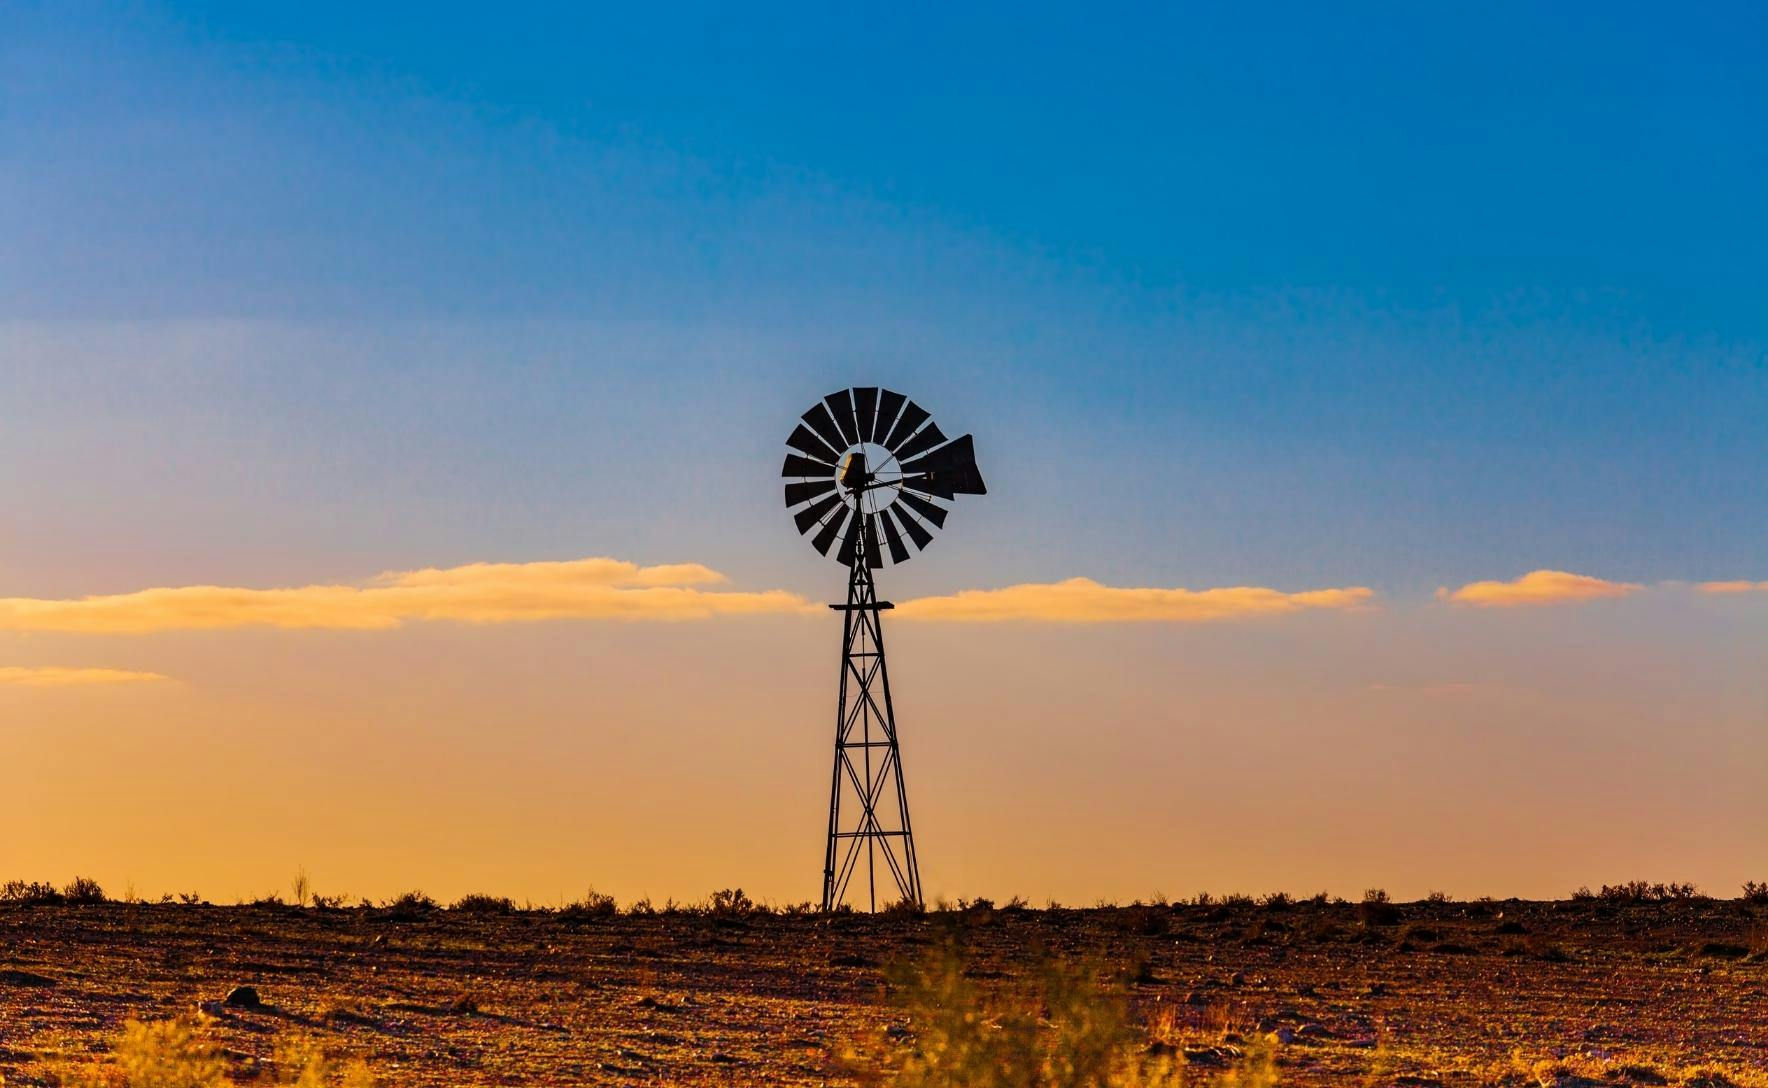 windmill pictured on bare flat country. The sun is setting creating a sky that is blue and orange